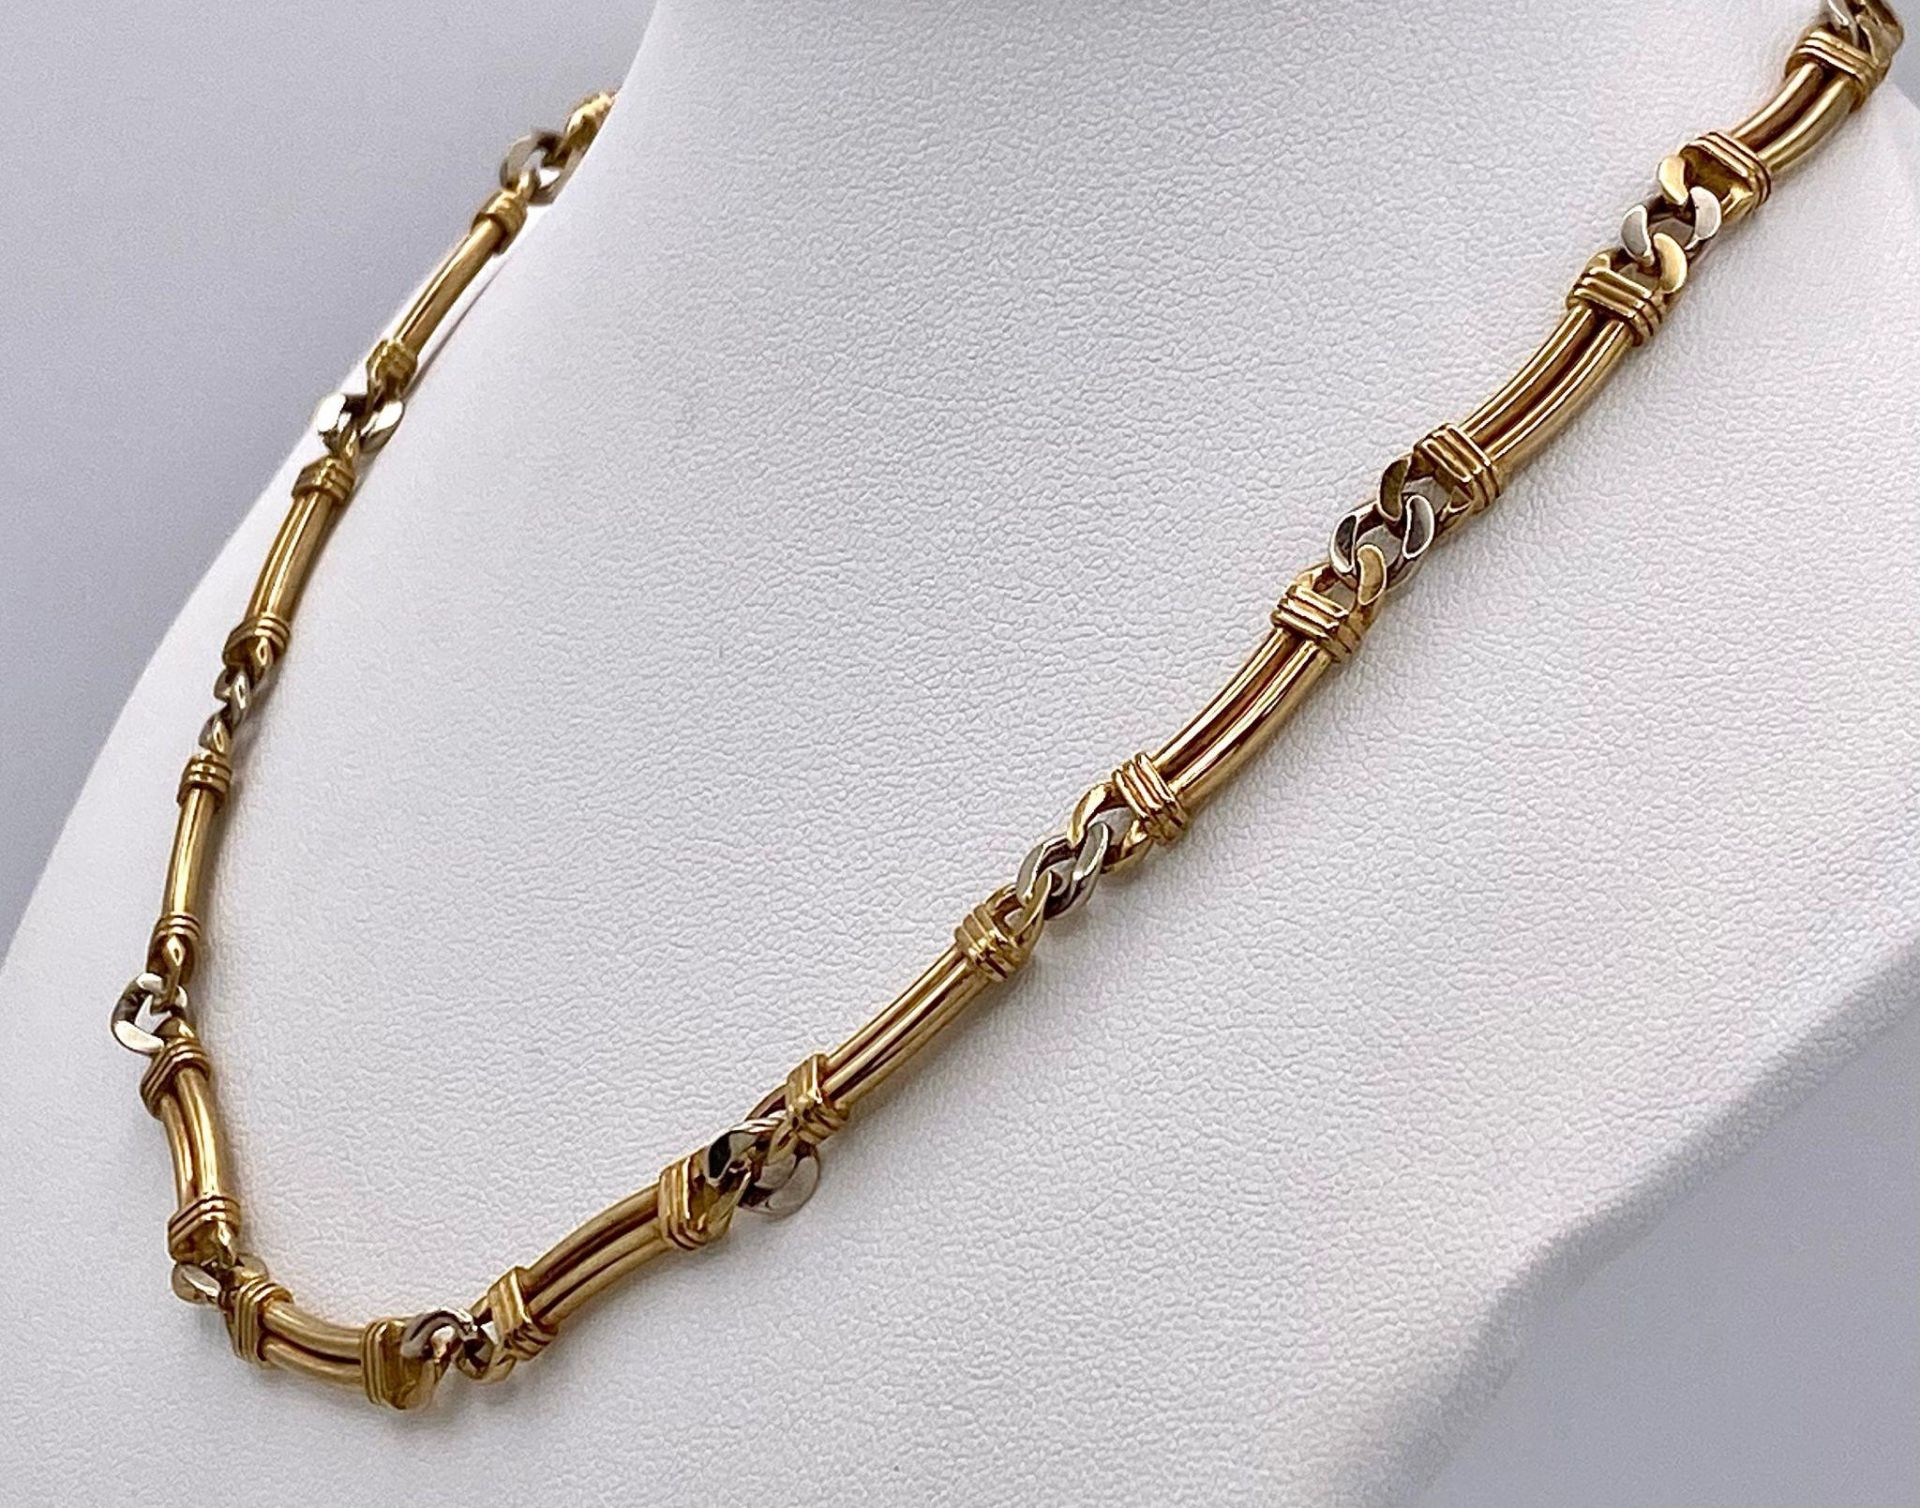 A Vintage 9K Yellow Gold Double Bar Necklace with Curb Spacers. 40cm. 21.2g weight. - Bild 3 aus 5